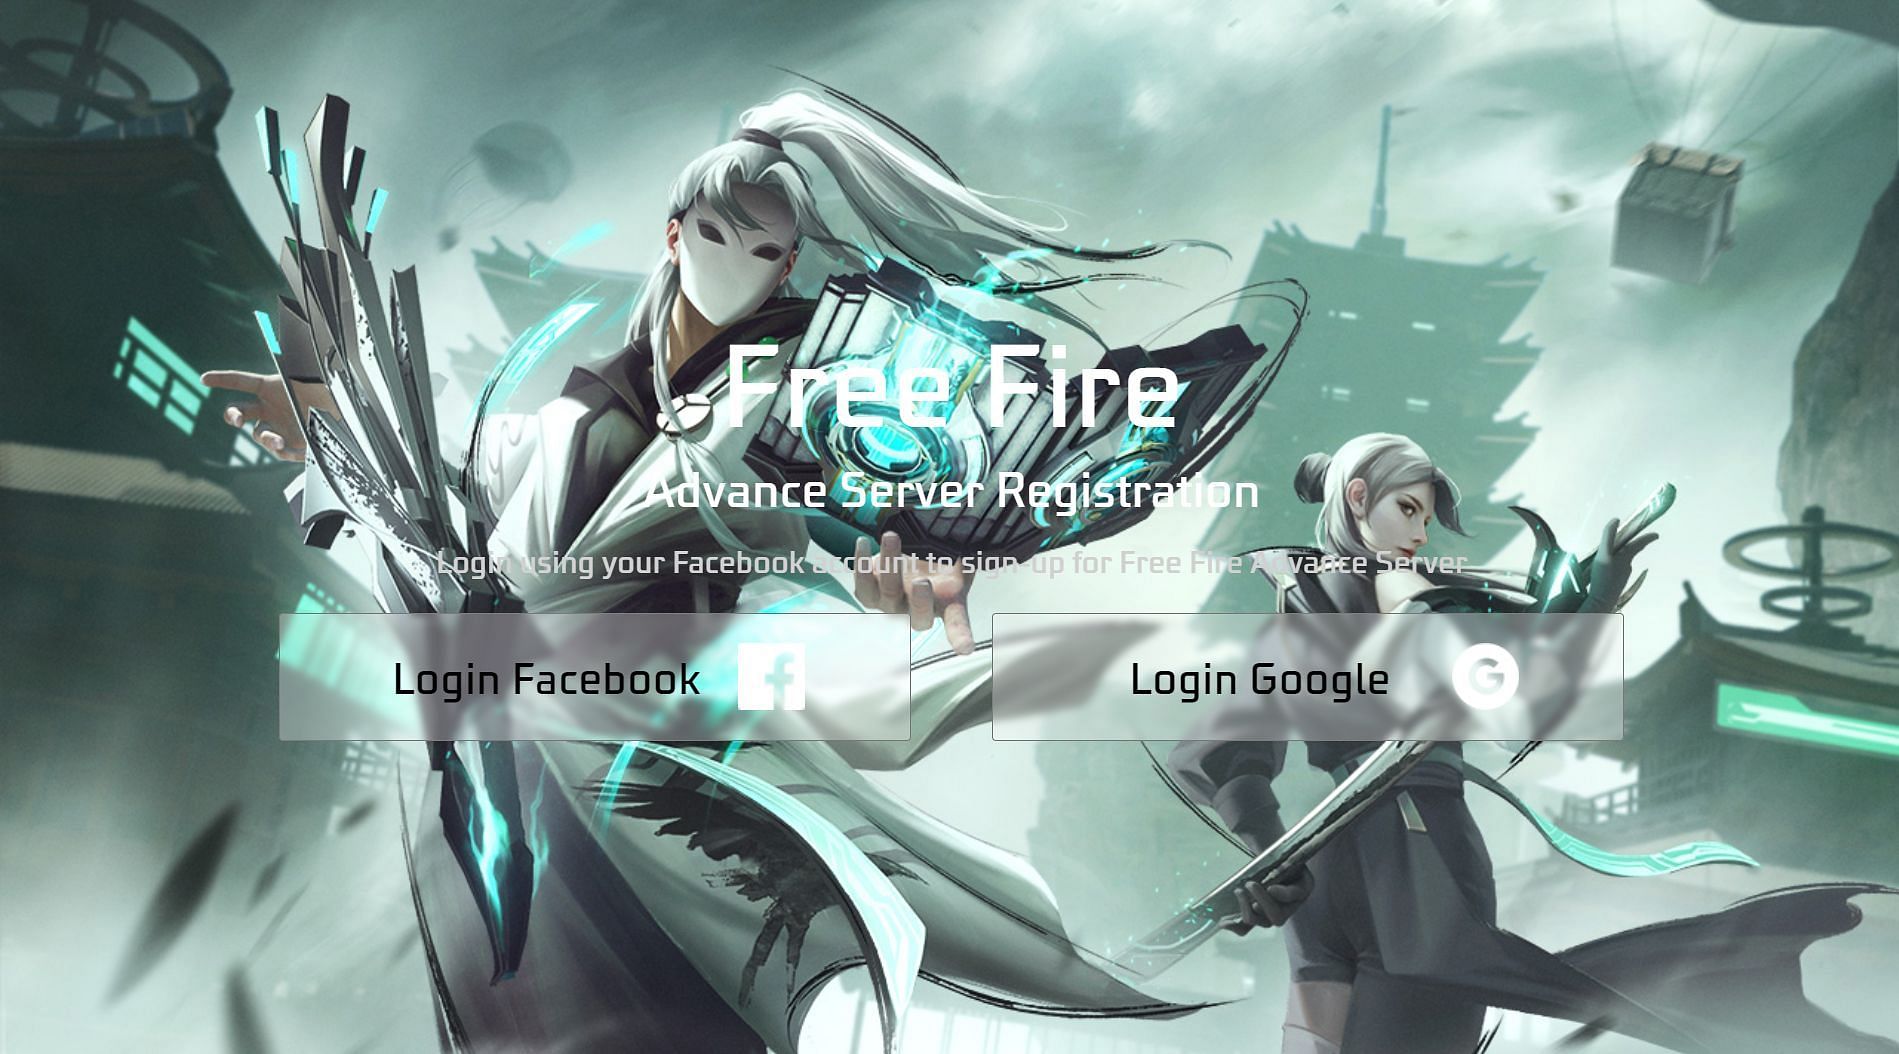 You cannot register for Advance Server with a guest ID (Image via Garena)